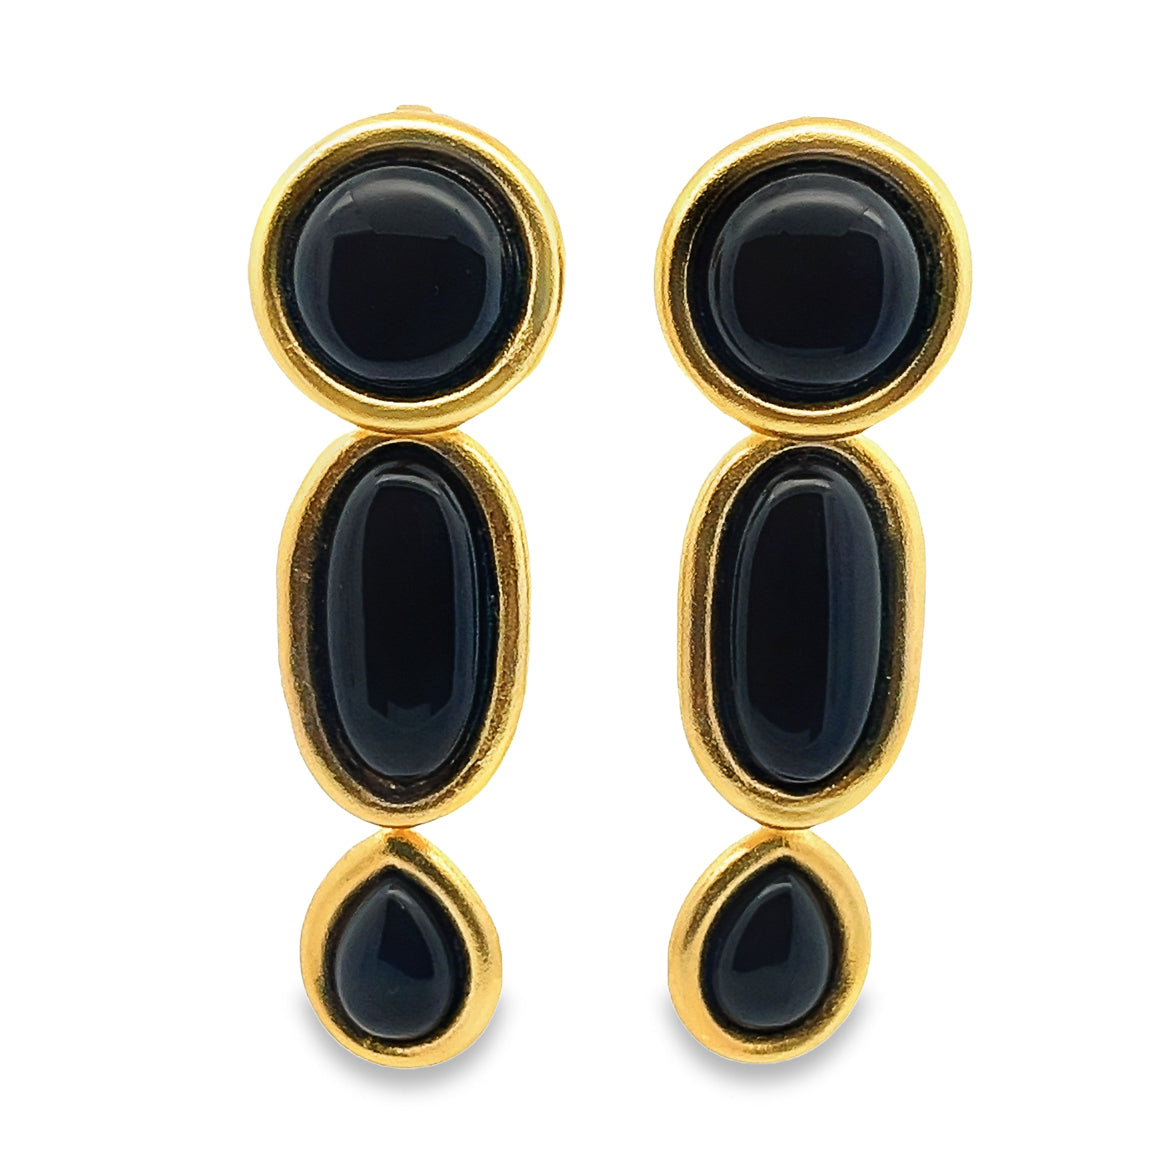 LUTHANA EARRINGS WITH BLACK STONE SET IN GOLDEN METAL